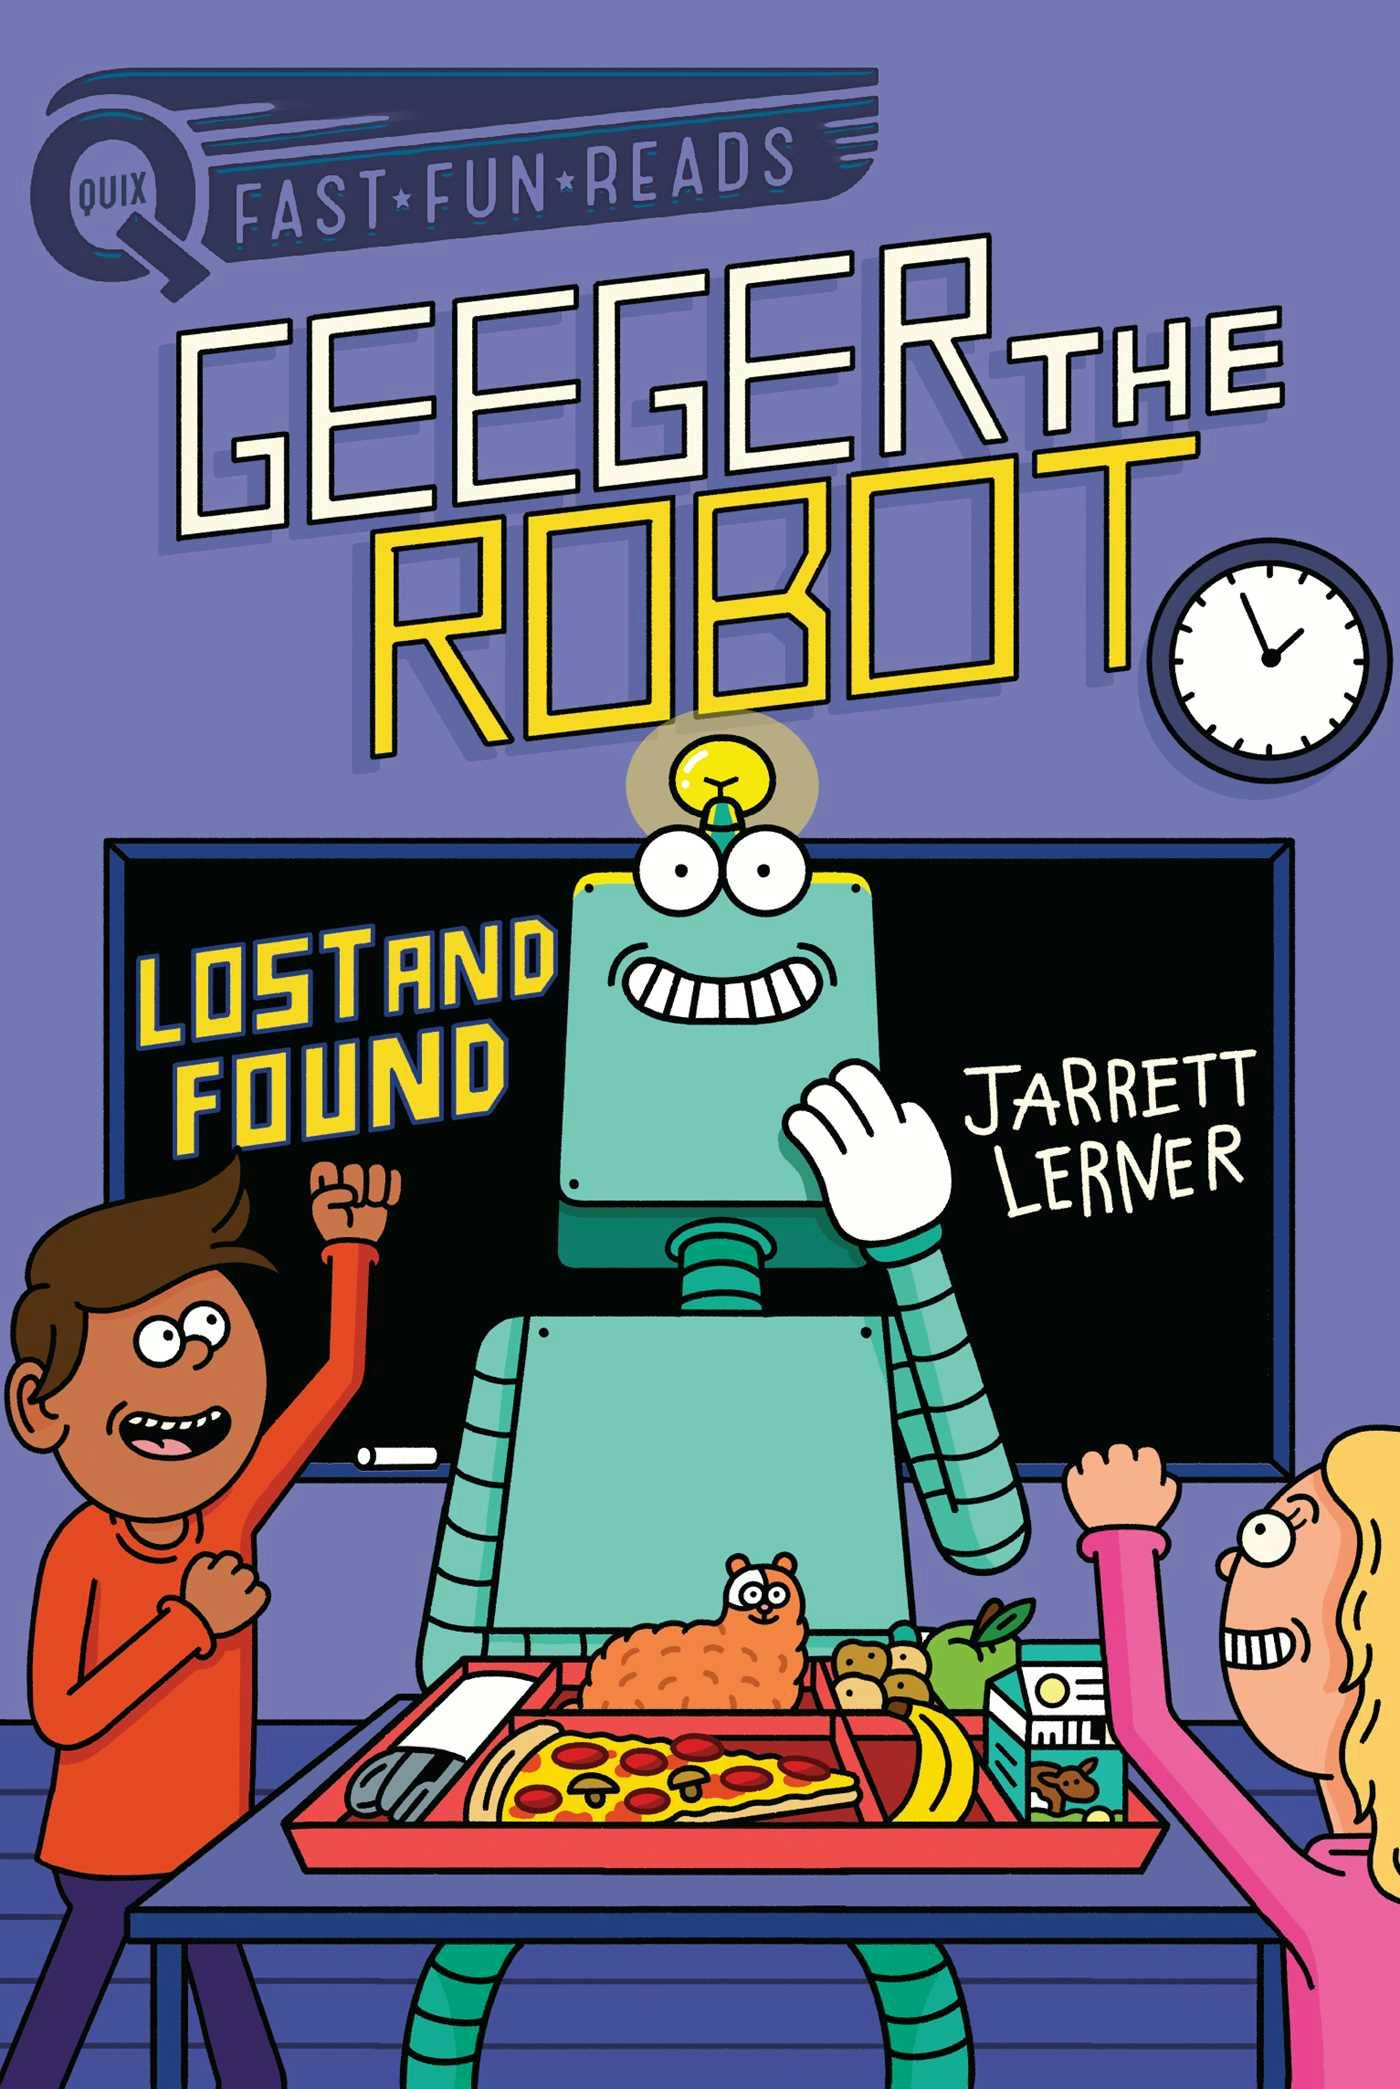 Lost and Found: Geeger the Robot - Jarrett Lerner